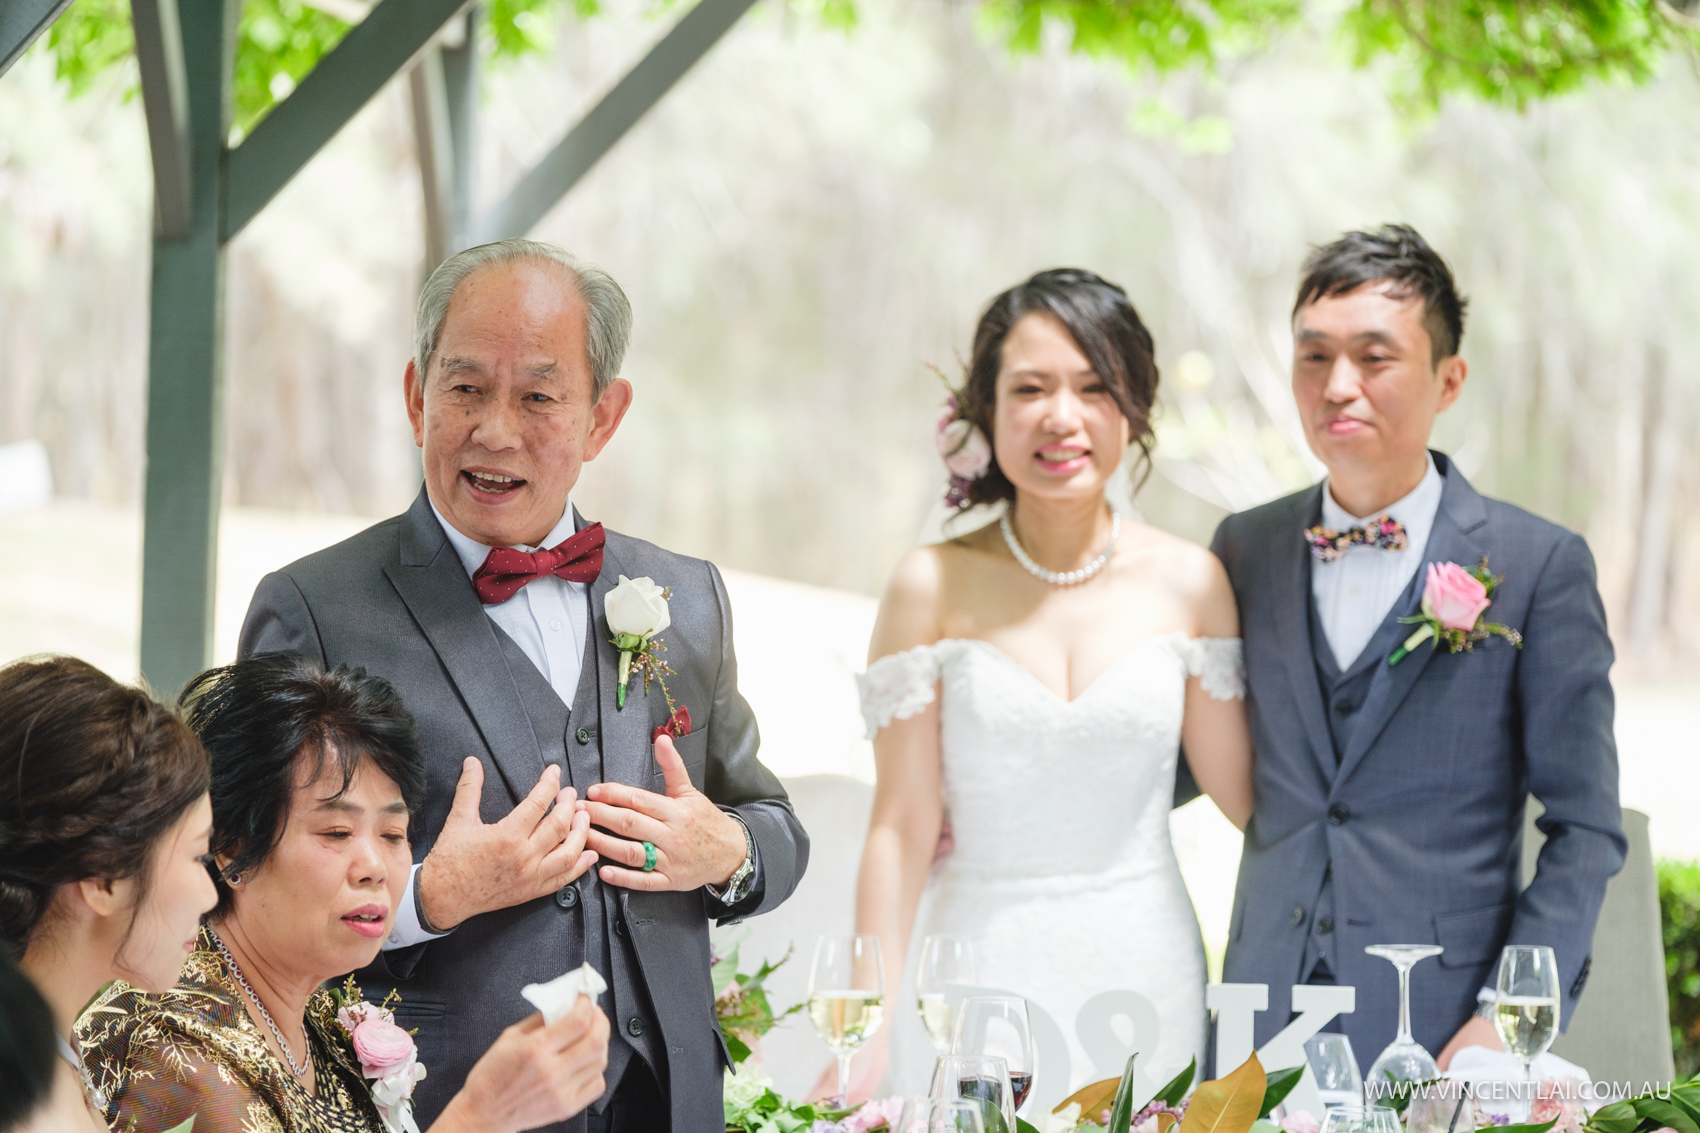 The Convent Wisteria Courtyard Wedding